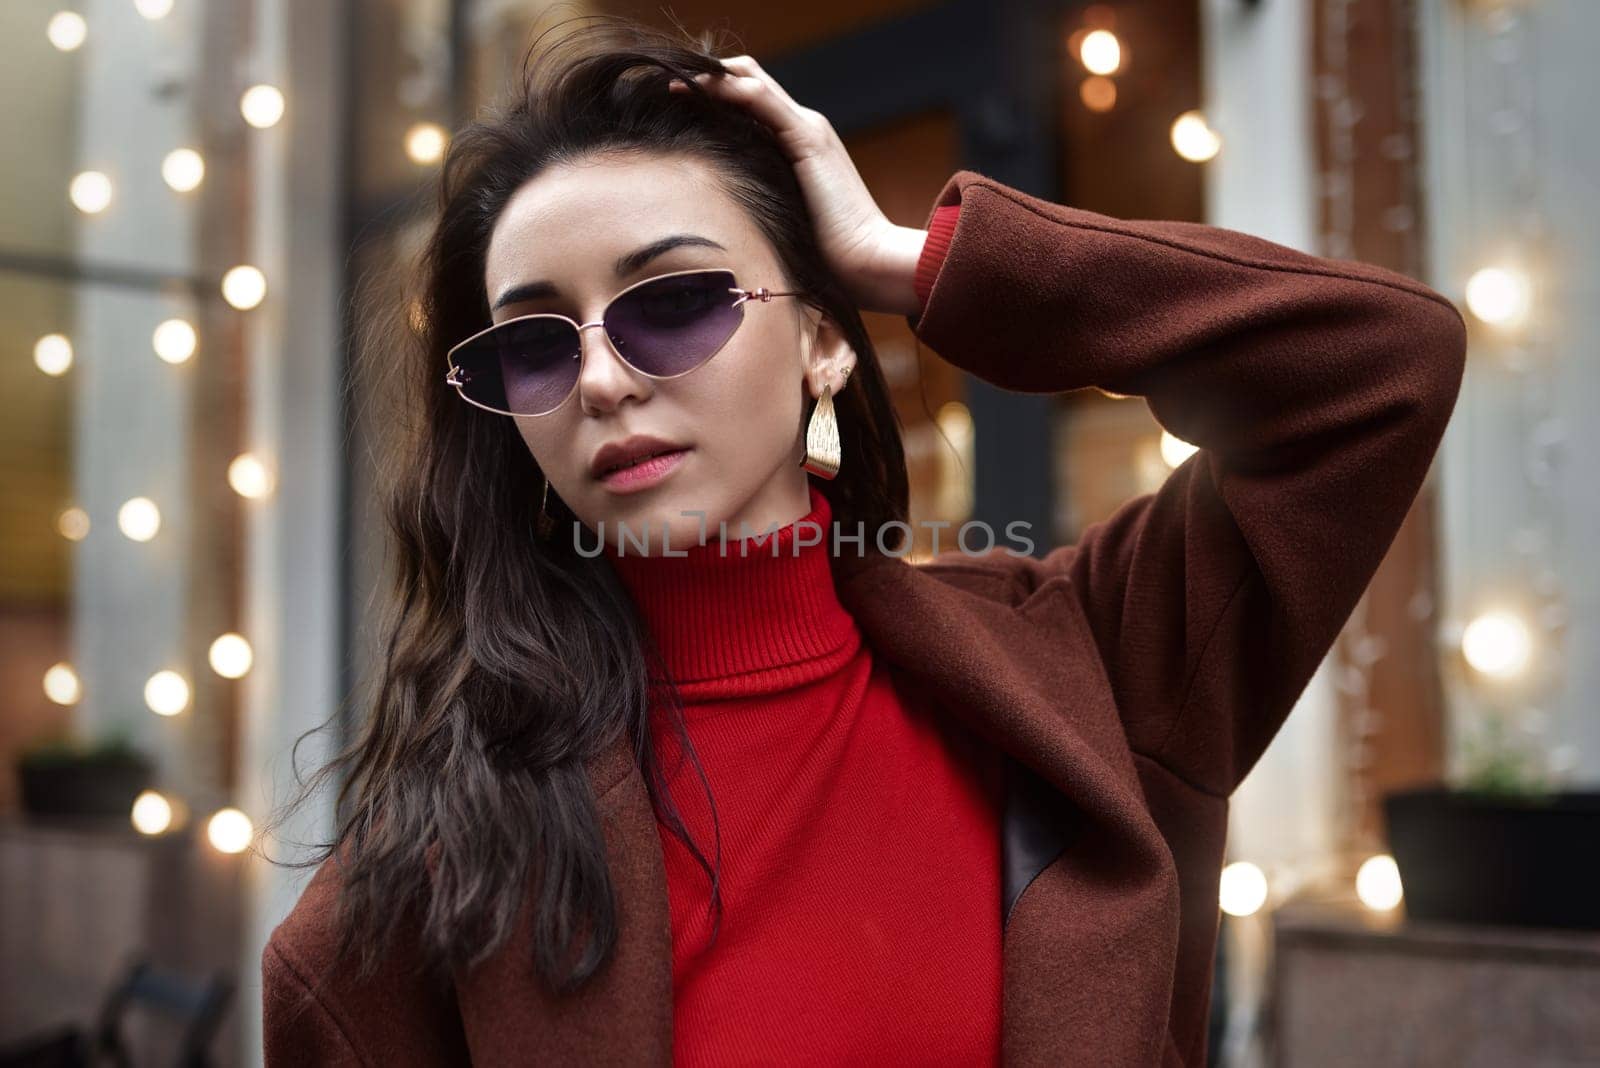 Portrait of a Woman in sunglasses fixing her hair on the street.